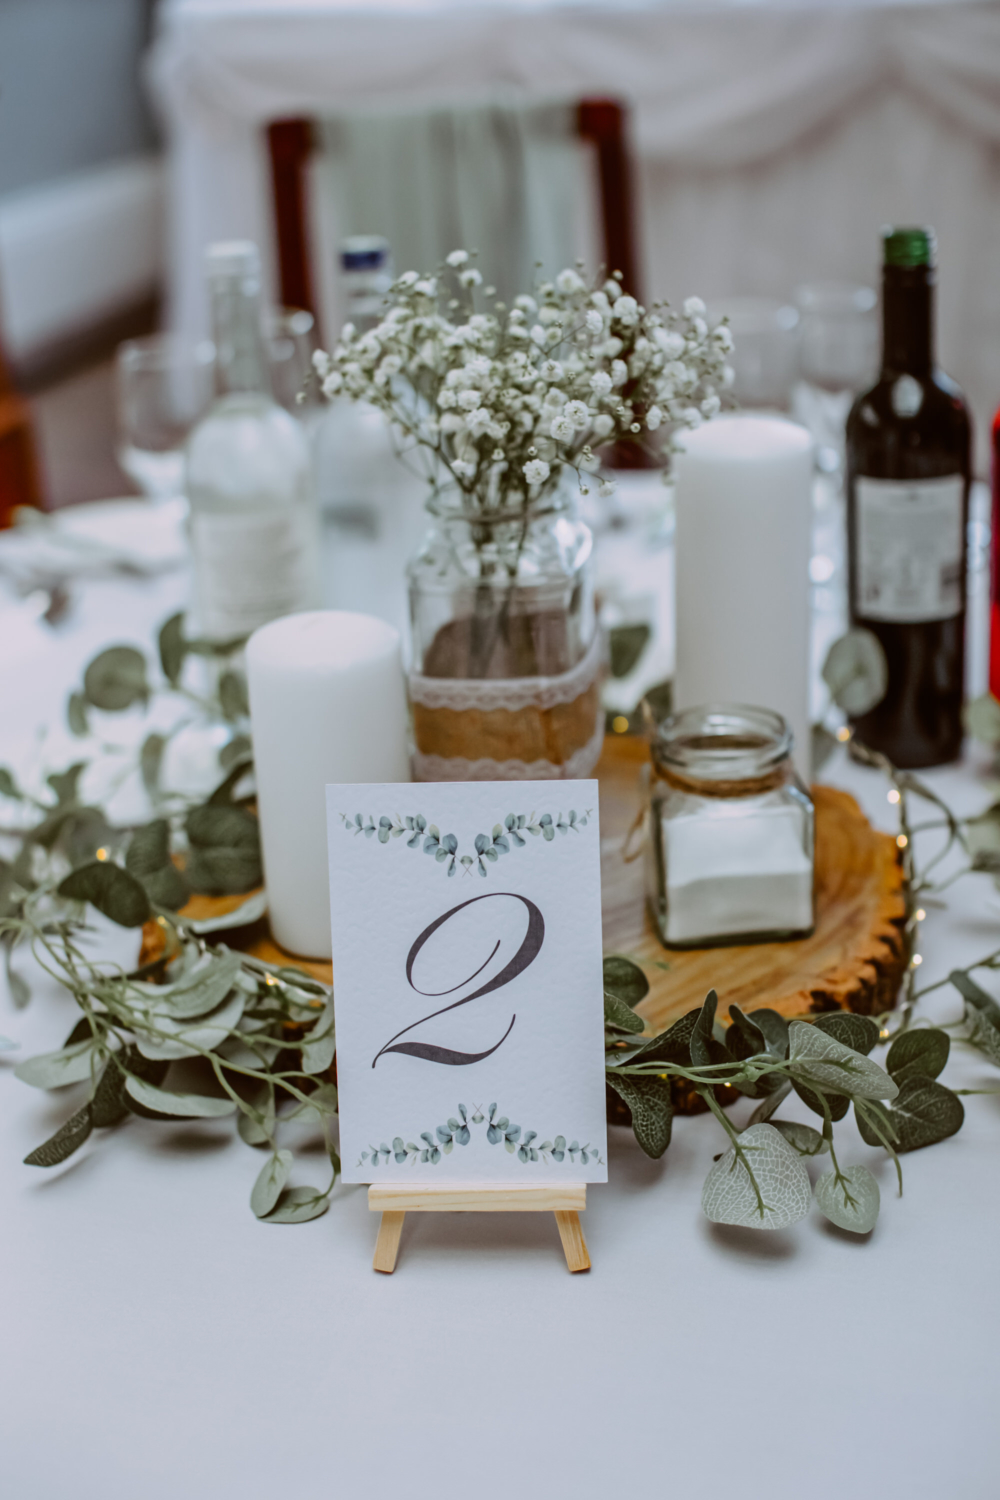 Detailed photo of decorated table with candles, table number and flowers